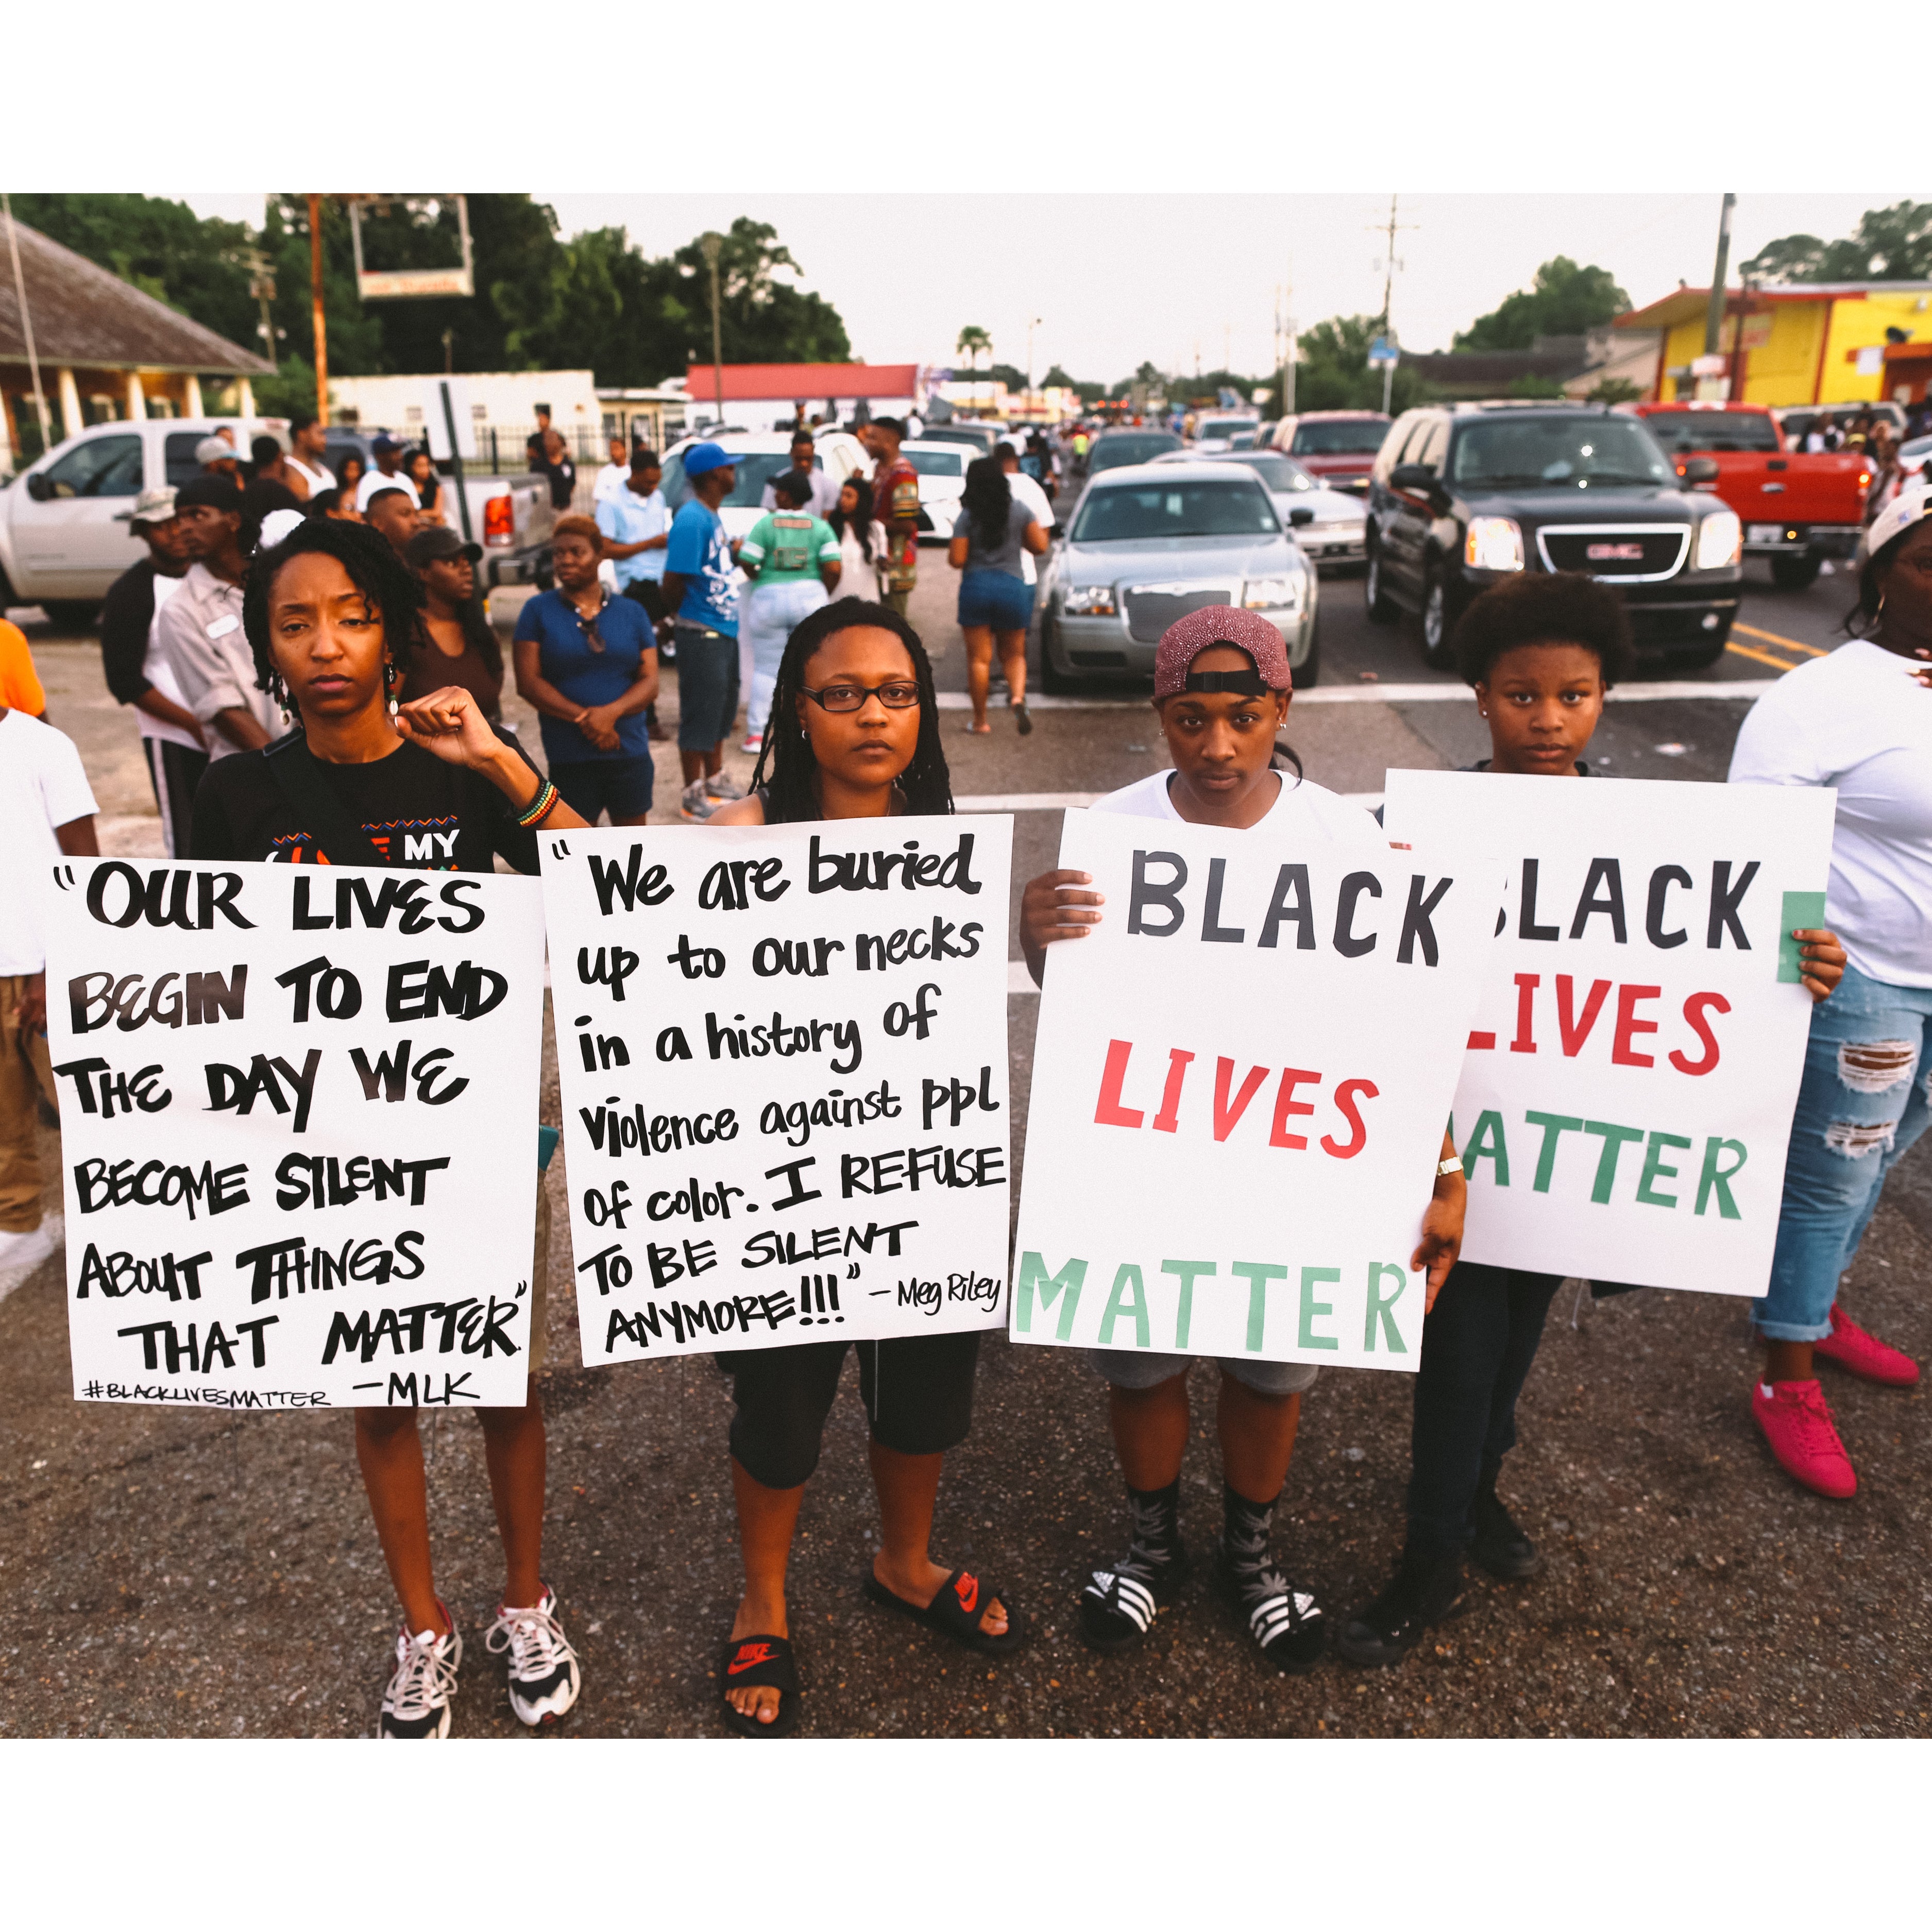 #BlackLivesMatter: Powerful Images of Protests Against Police Brutality Around the Country
